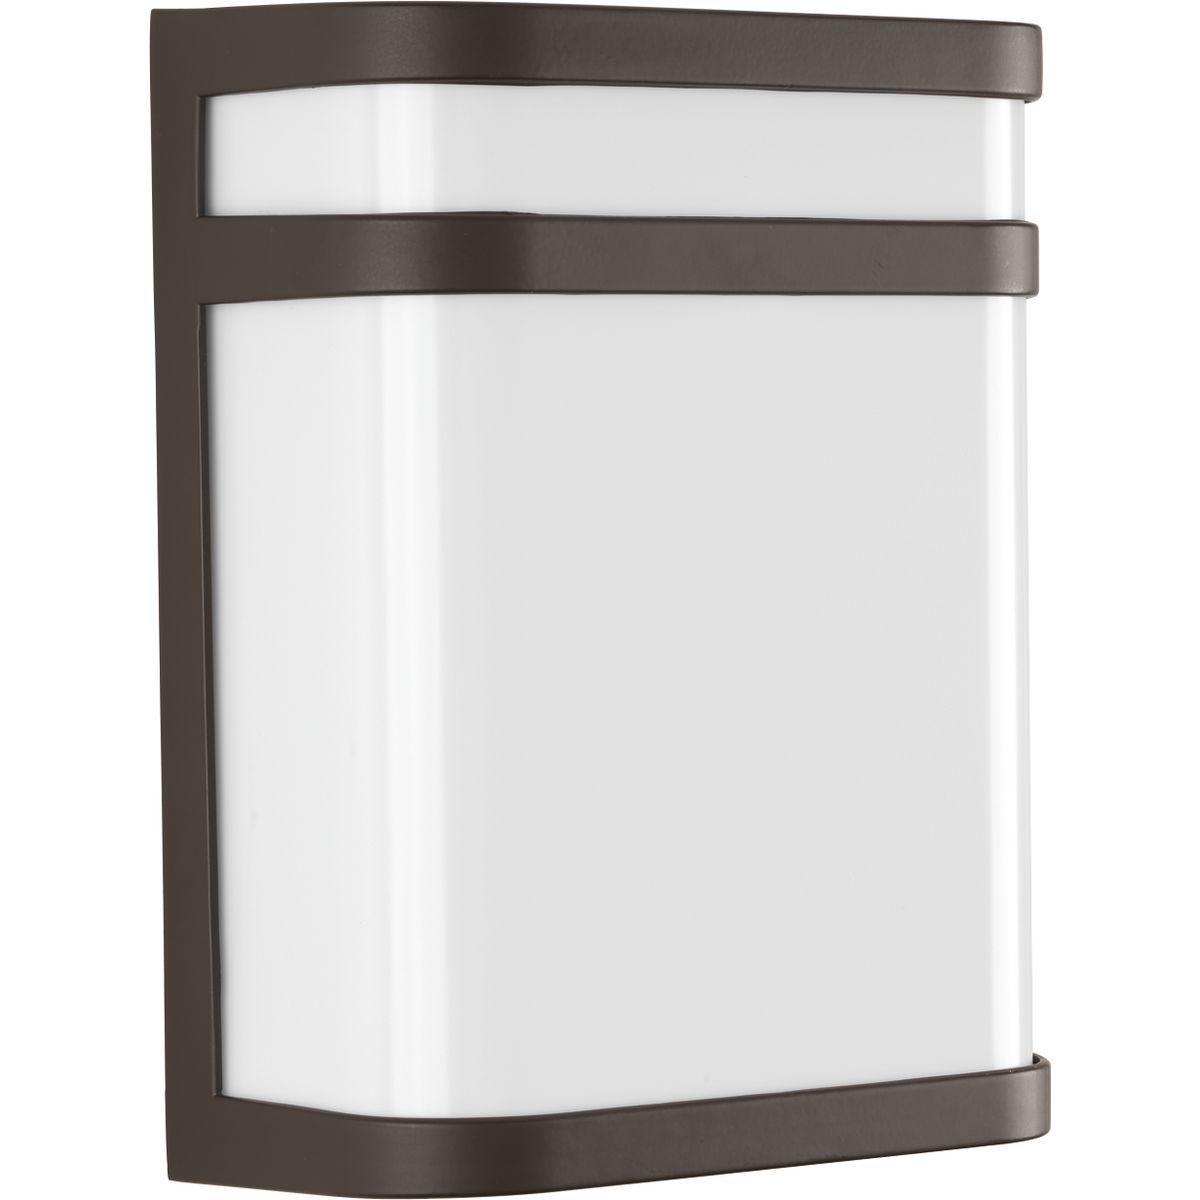 Hubbell P5801-12930K9 Clean lines are up front and center for these modern LED outdoor sconces. Valera features a die-cast aluminum frame and matte white, acrylic diffuser. Energy efficient LED source offers 3000K color temperature and 90+CRI output. Title 24 compliant. One-li